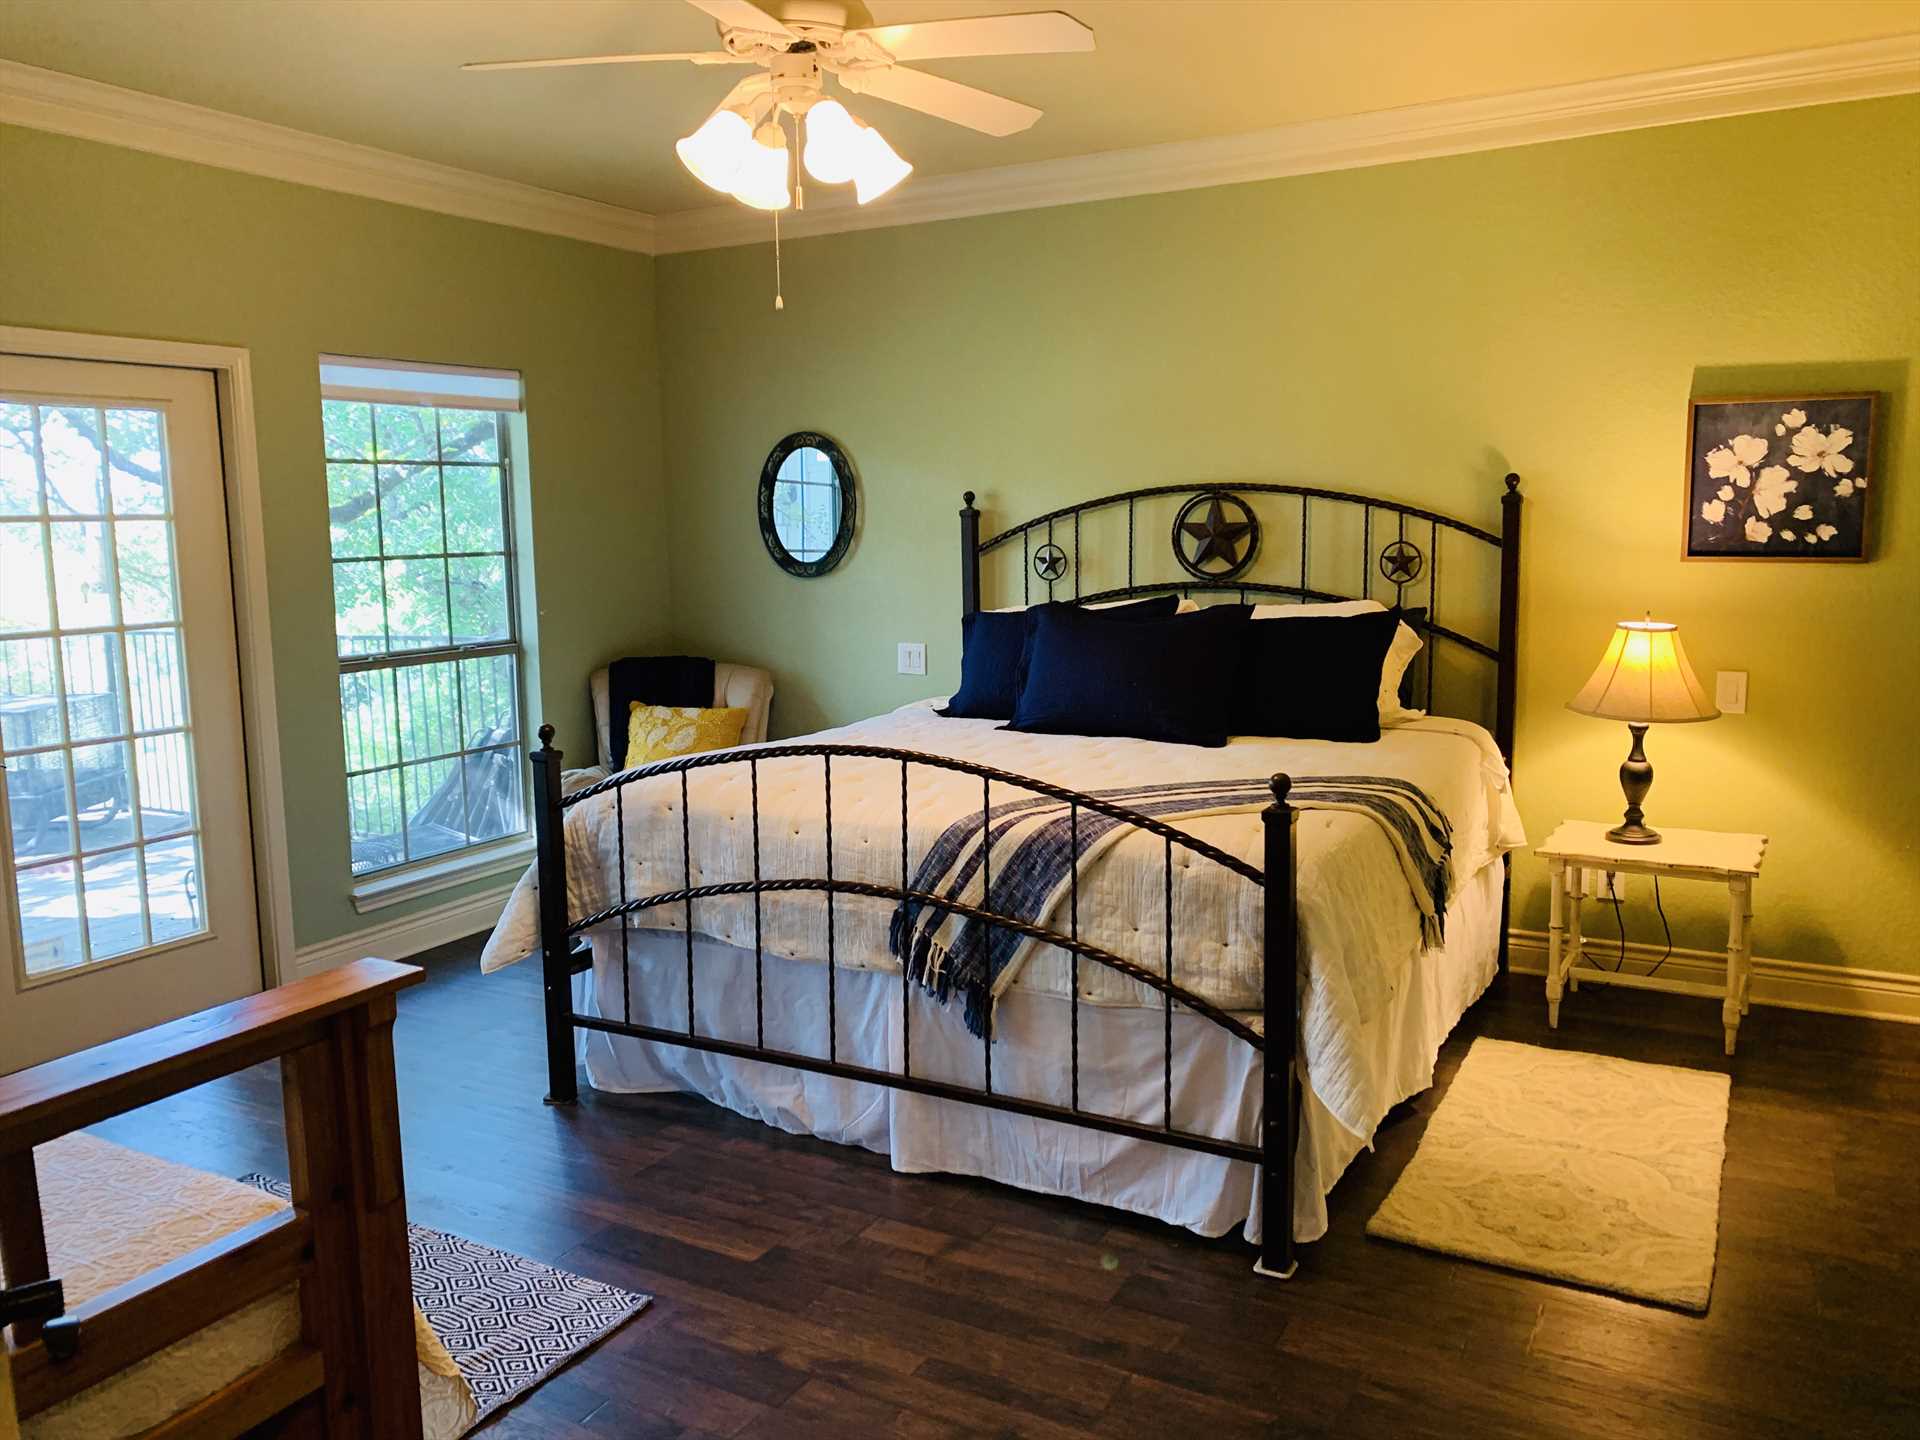                                                 The spacious master bedroom sleeps up to three, with a king-sized bed and an accompanying single day bed. All bed and bath linens are included here.